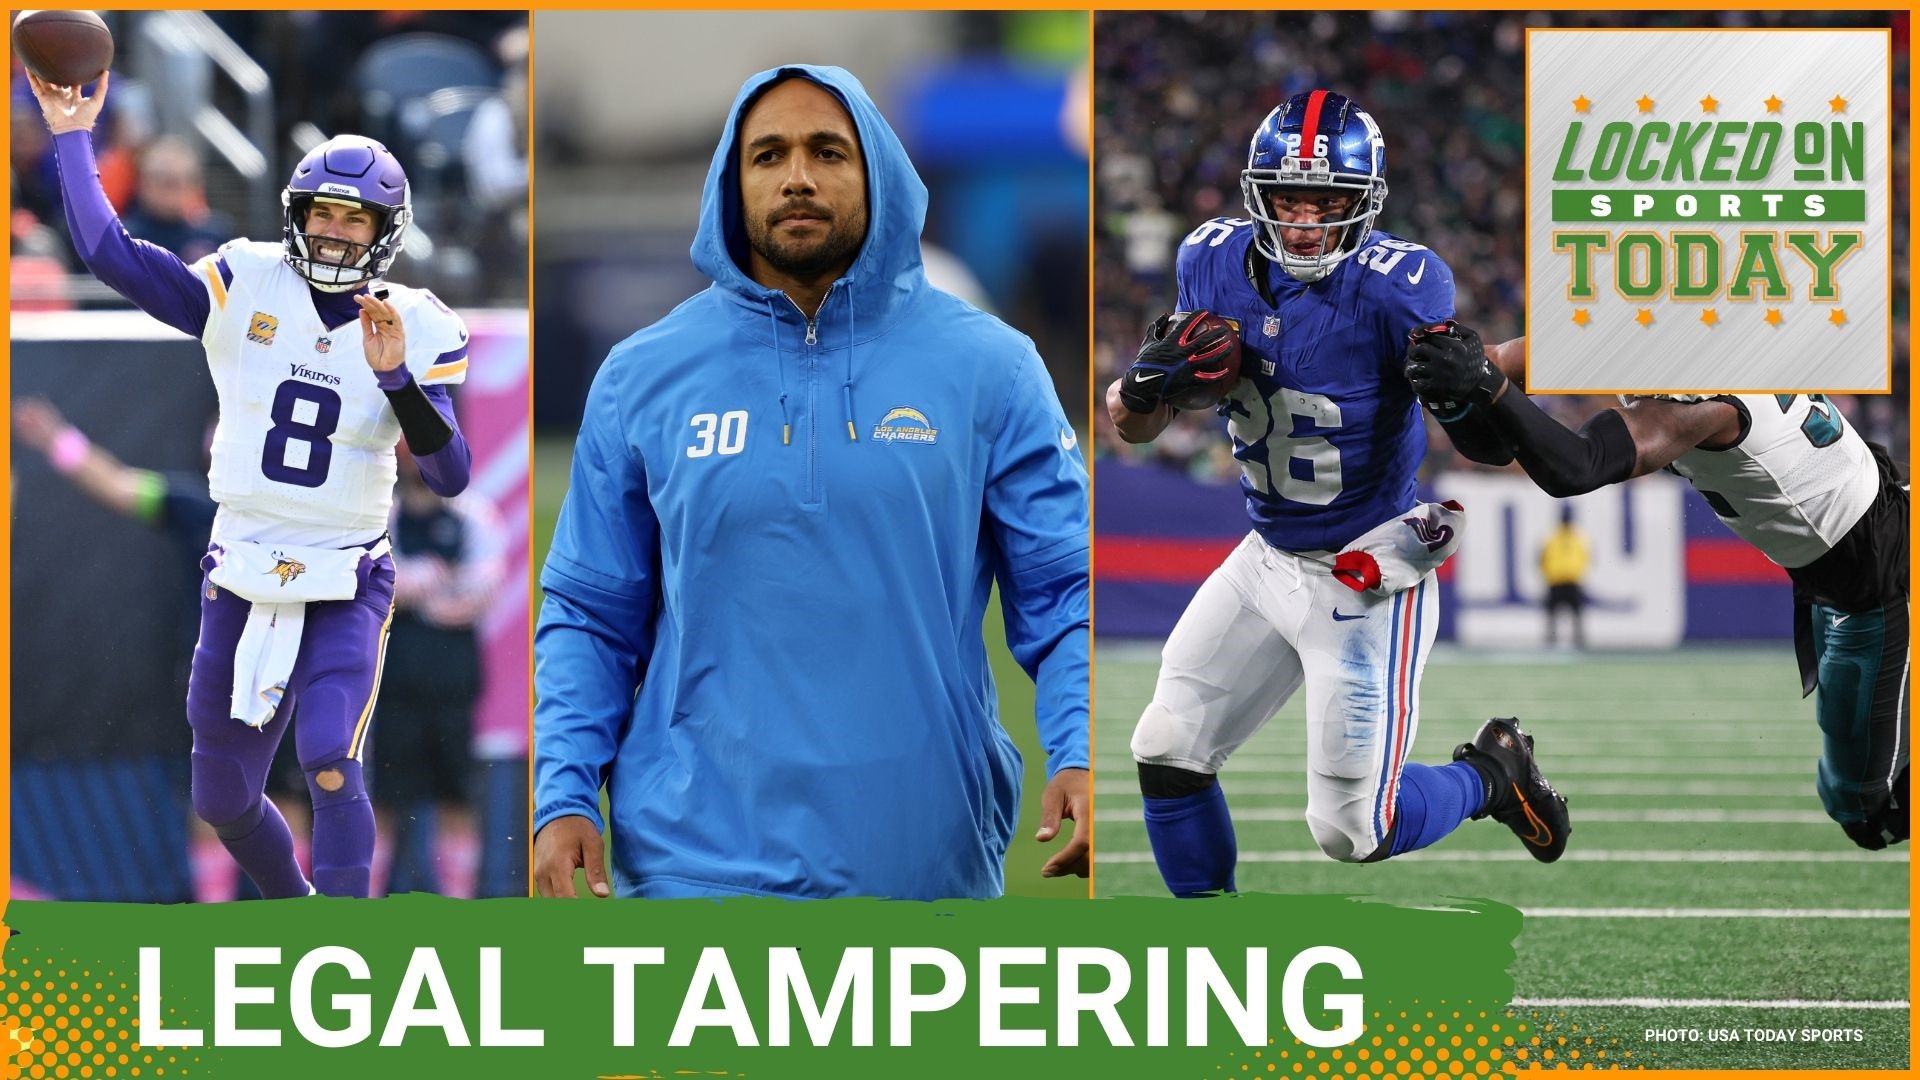 Discussing the day's top sports stories from NFL legal tampering to the Packers making a lot of moves.